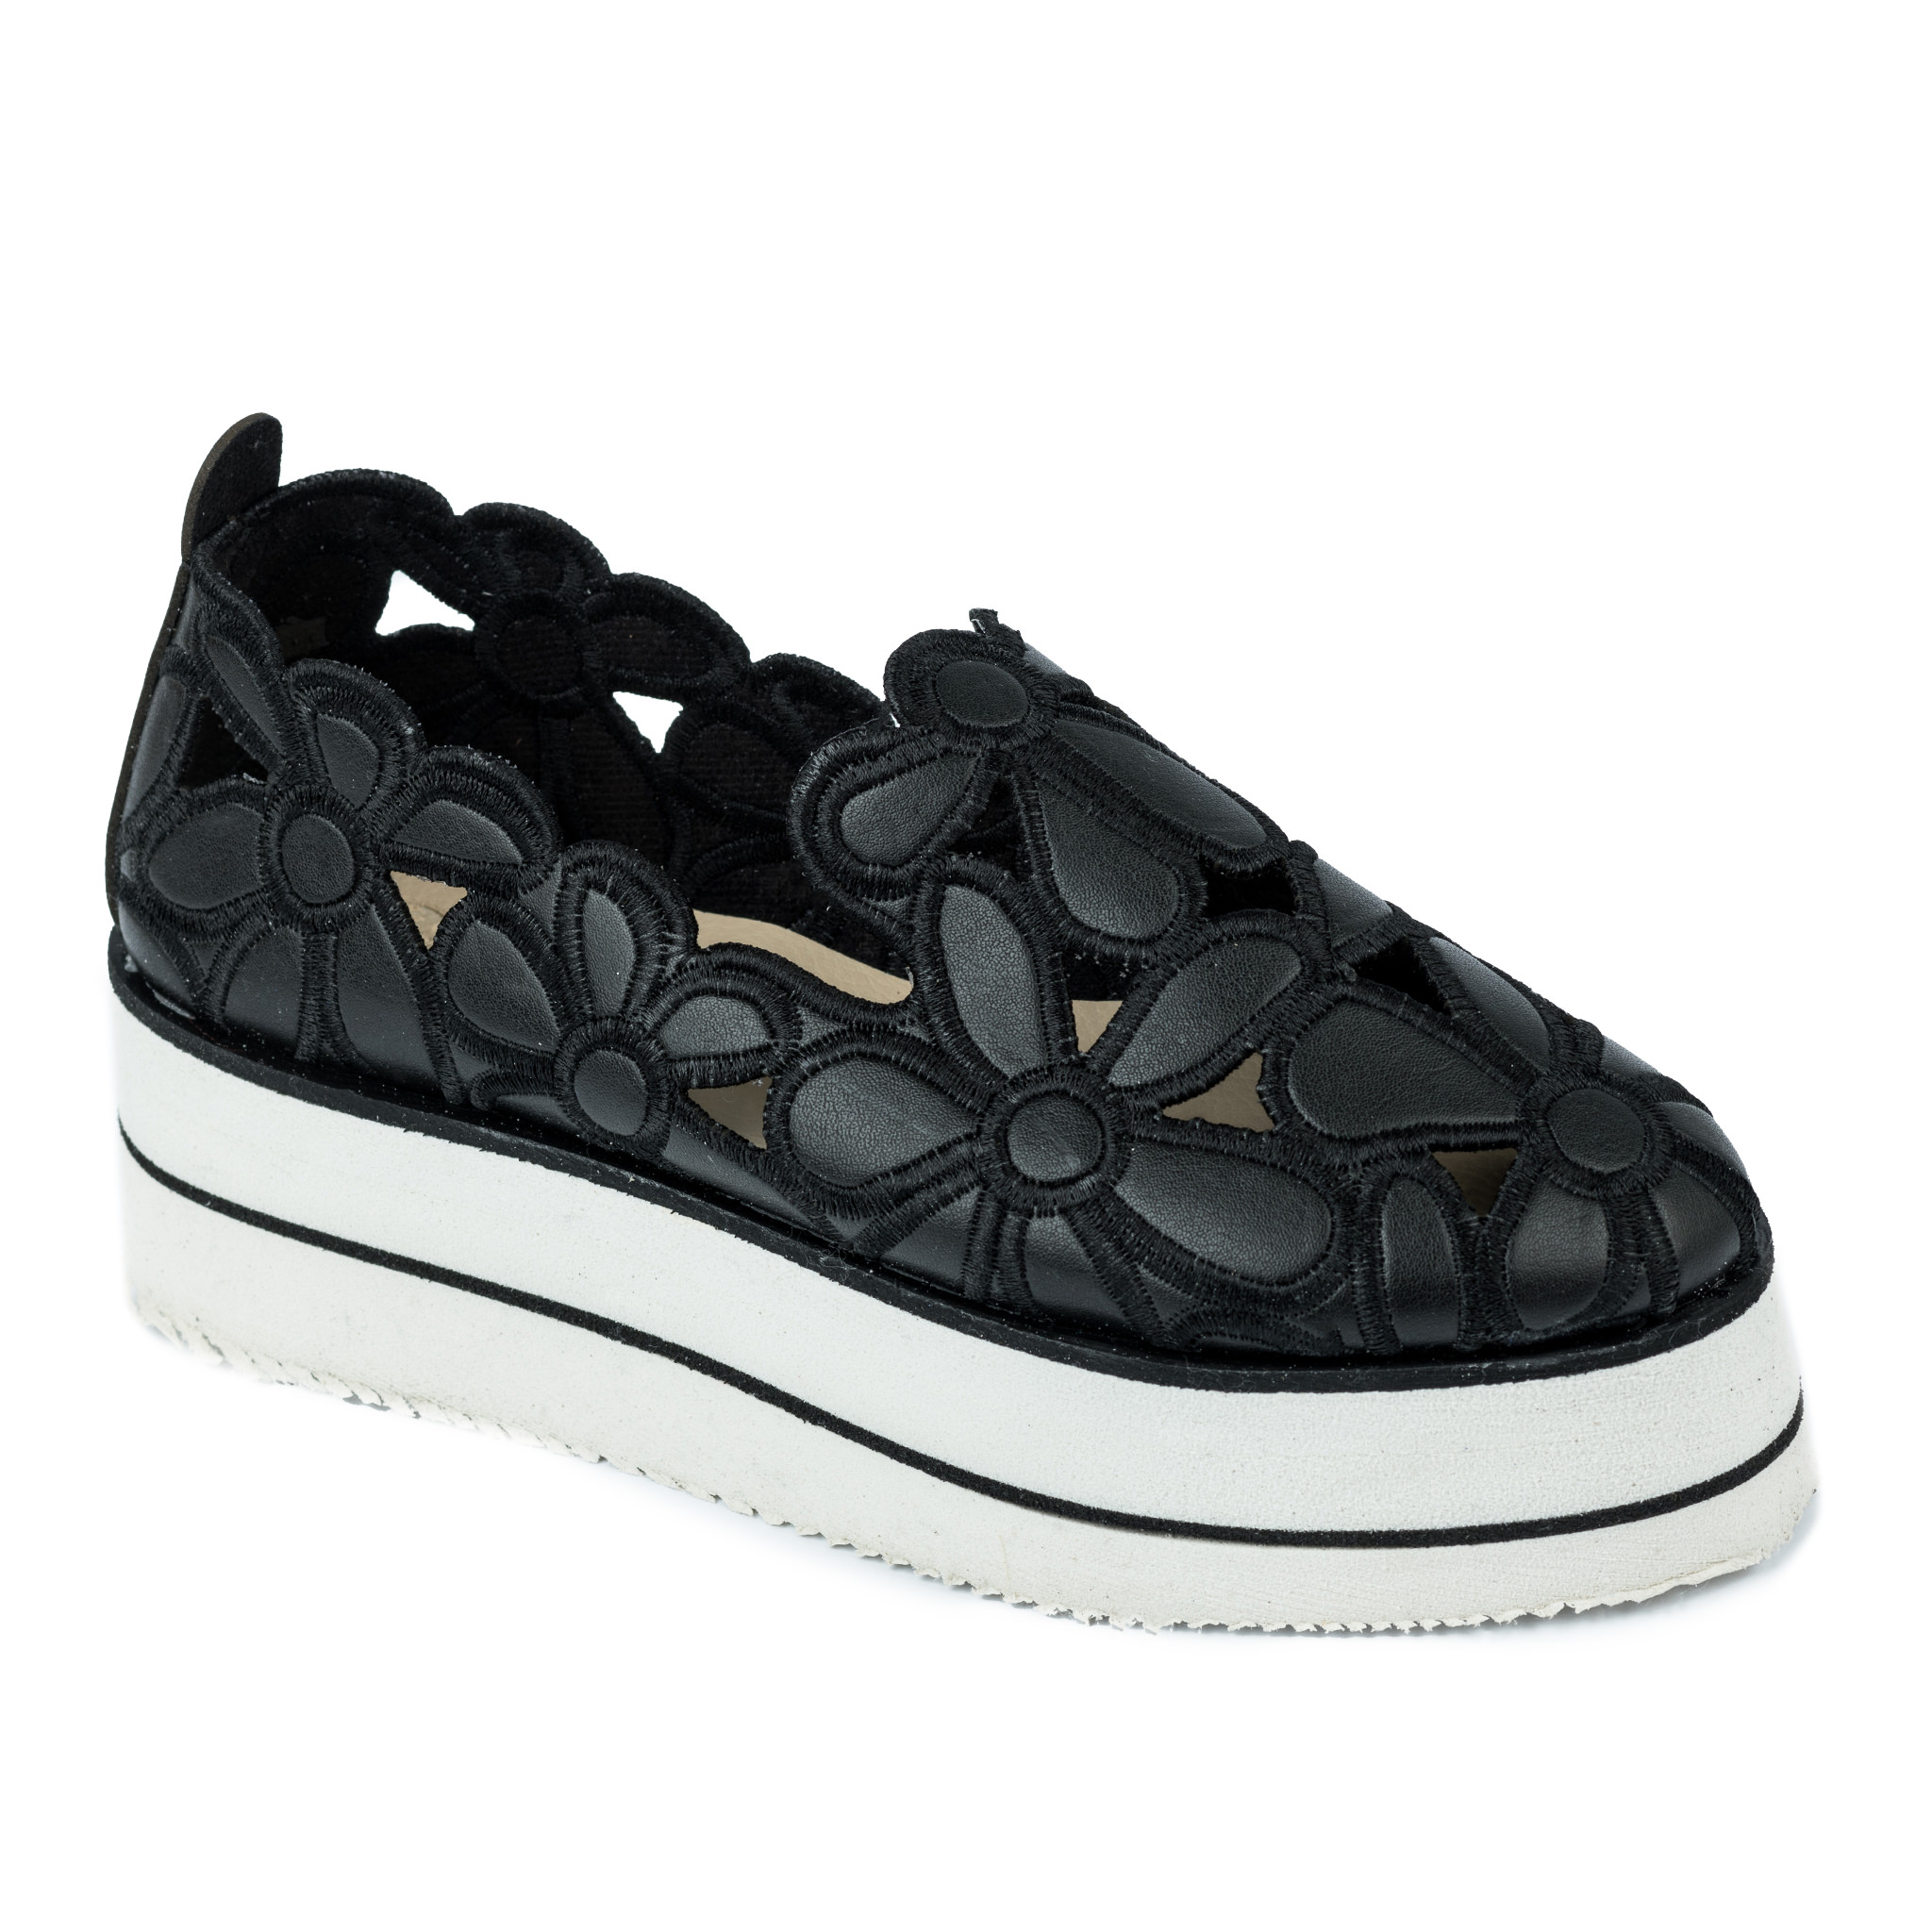 SHOES WITH HIGH SOLE AND FLOWER PRINT - BLACK